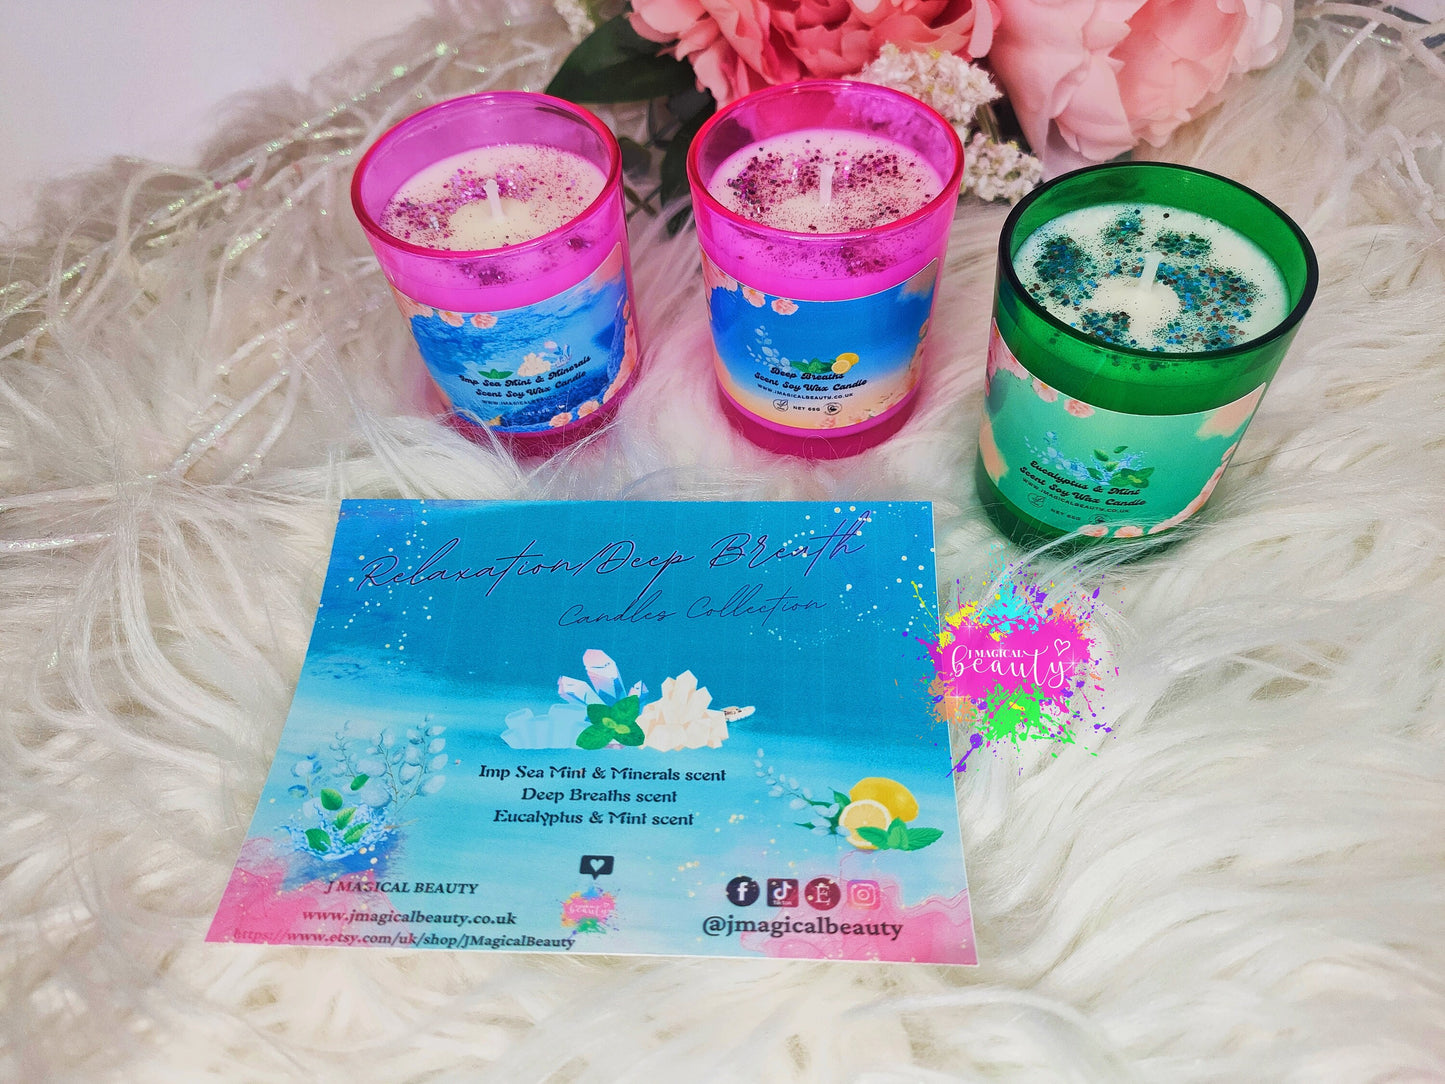 Relaxation/Deep Breath Scented Candle Trio Set